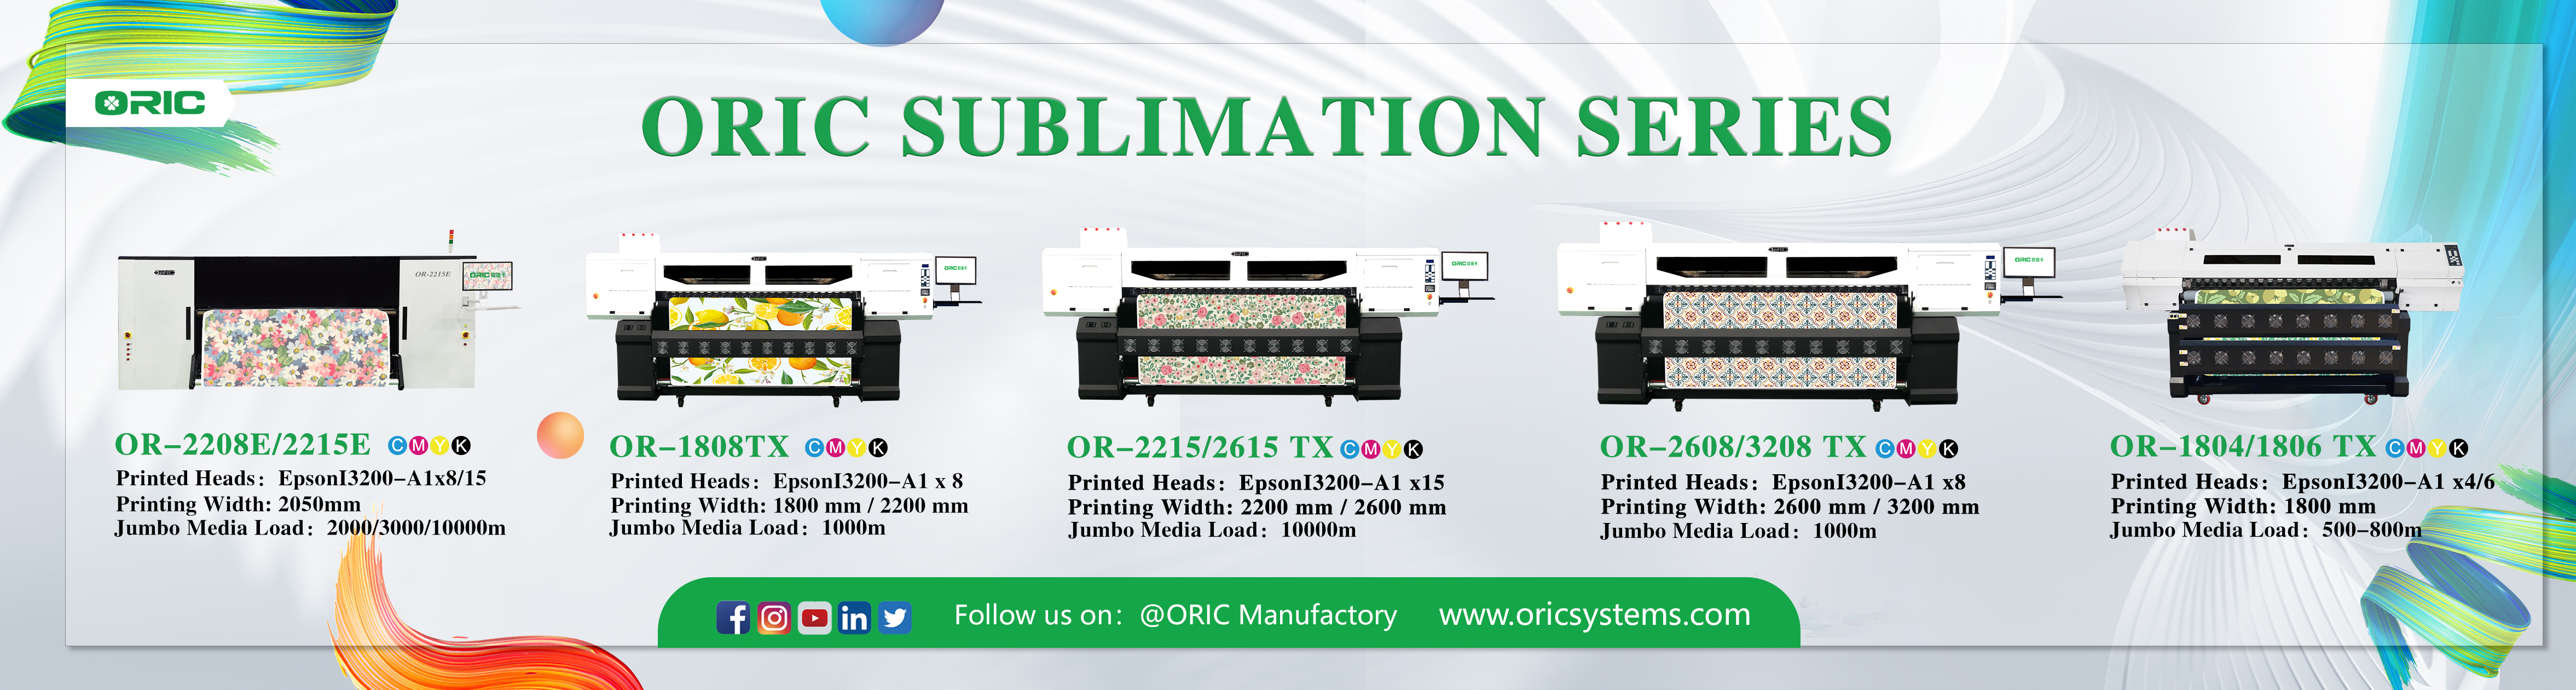 ORIC sublimation series